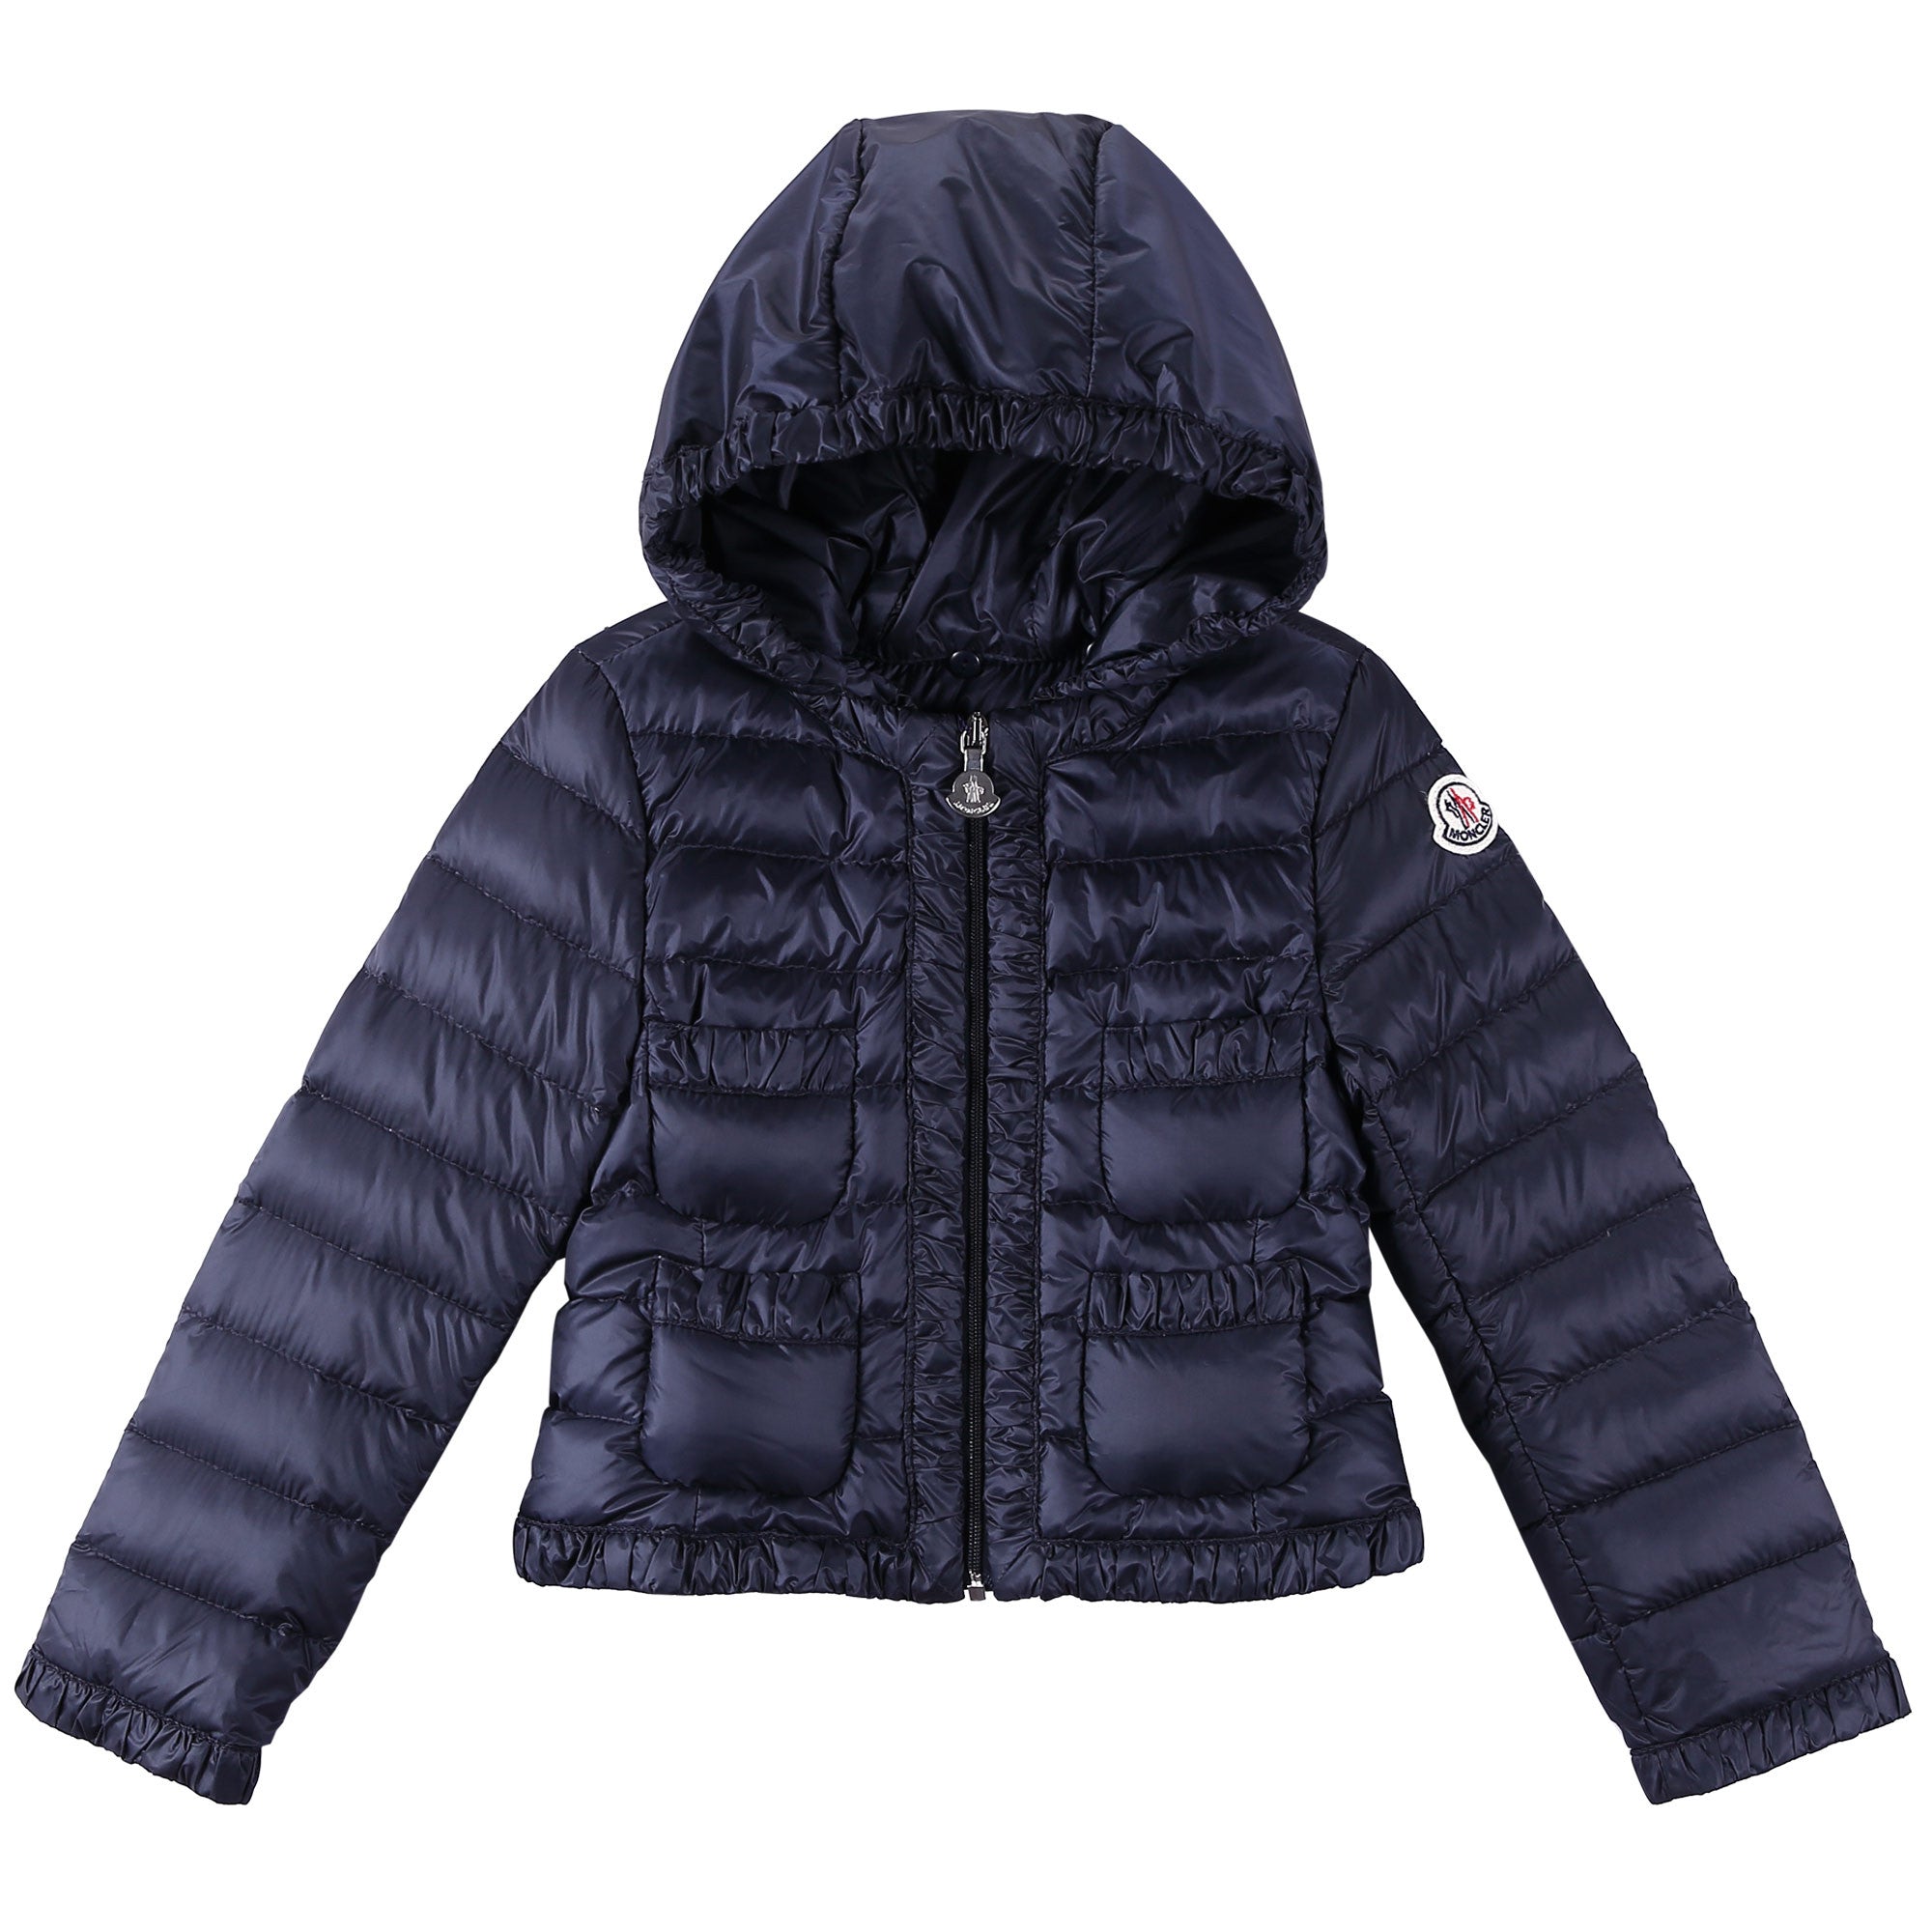 Baby Girls Navy Blue Down Padded 'Flavienne' Jacket With Frilly Cuffs - CÉMAROSE | Children's Fashion Store - 1